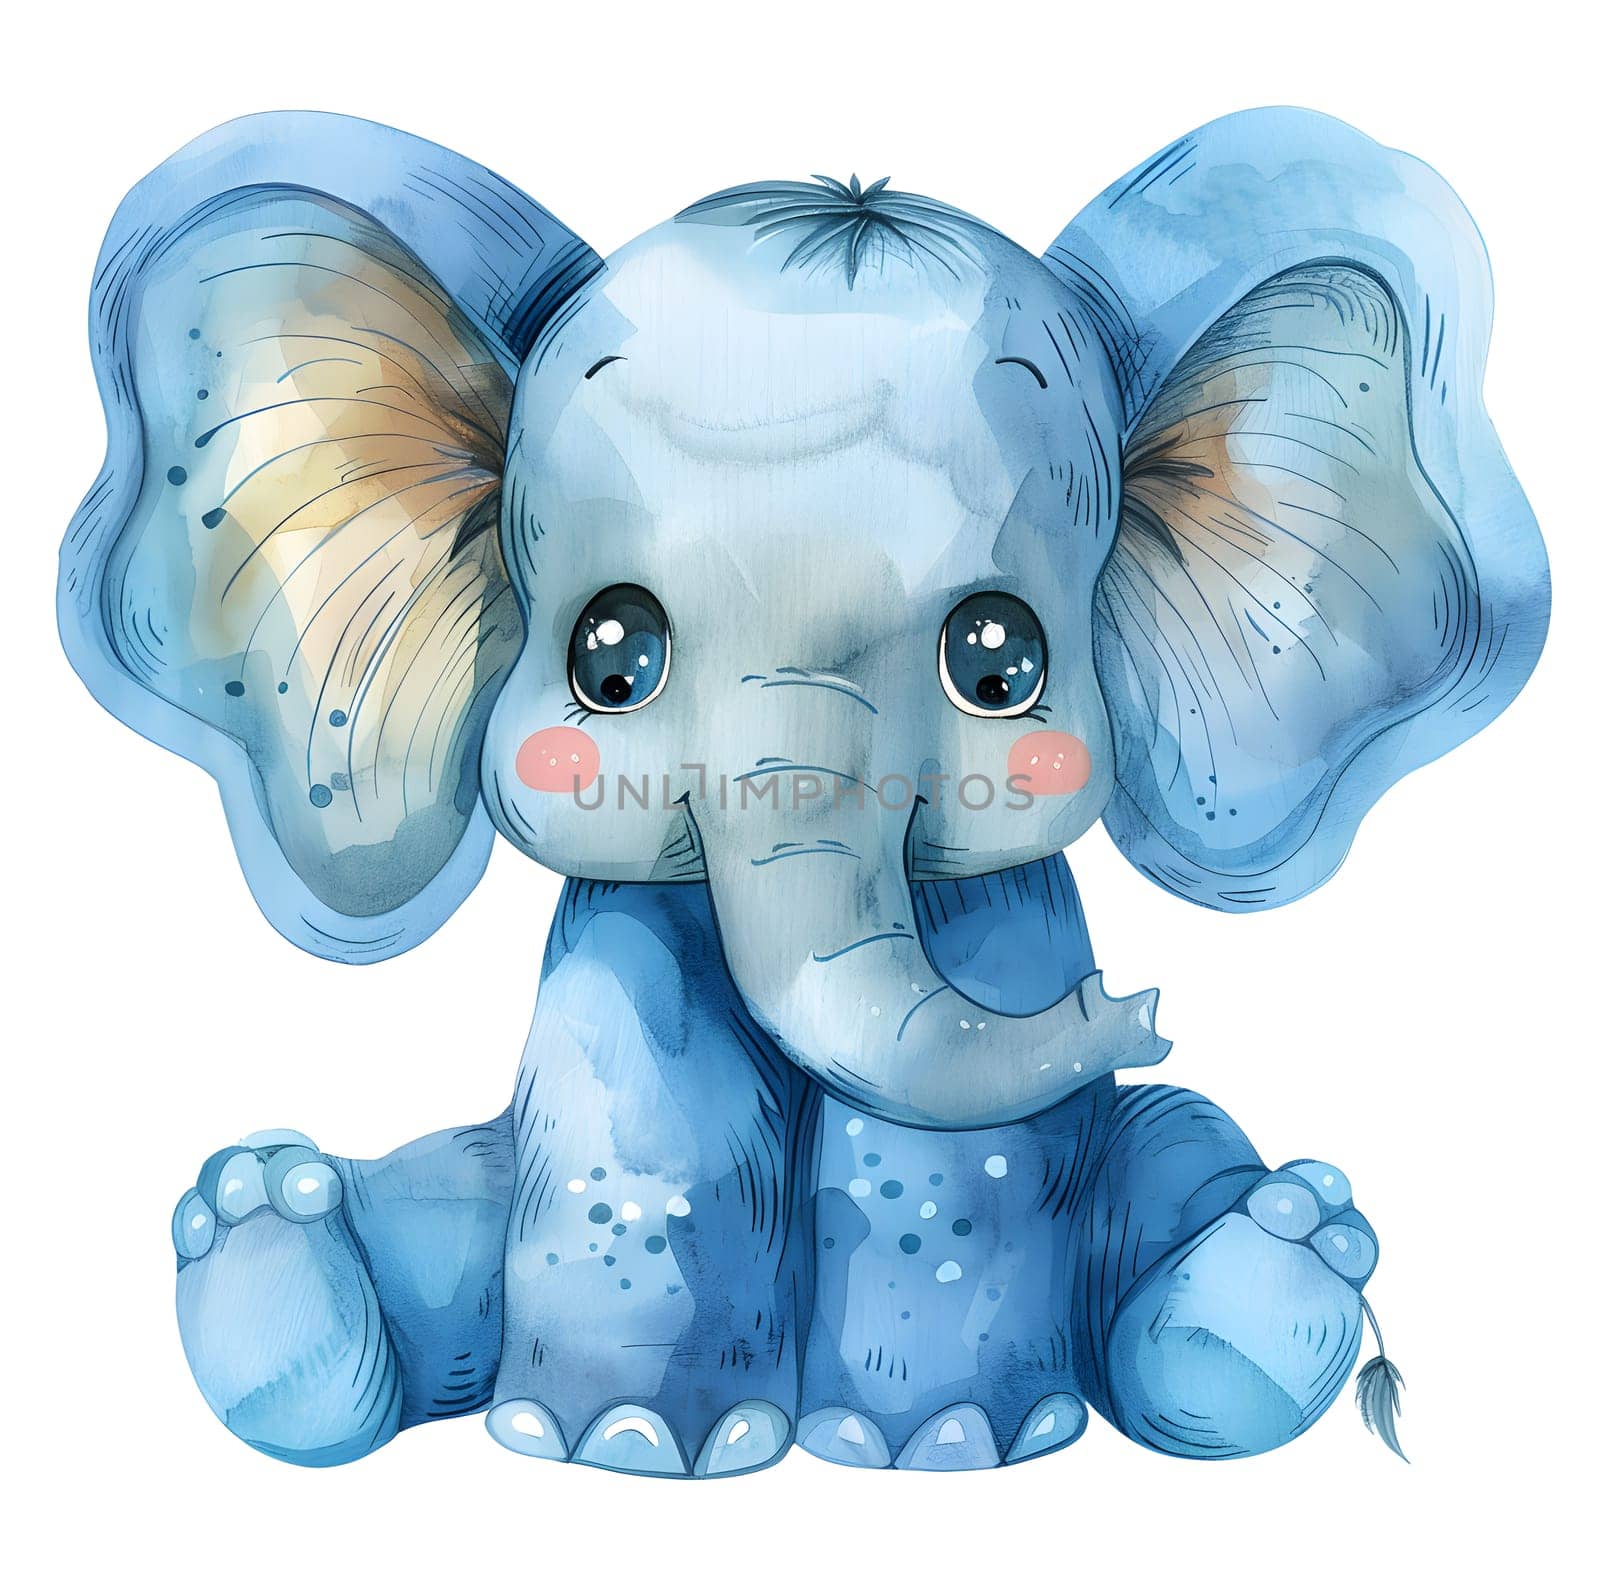 A baby blue elephant toy sits on a white background, smiling in a cute gesture by Nadtochiy